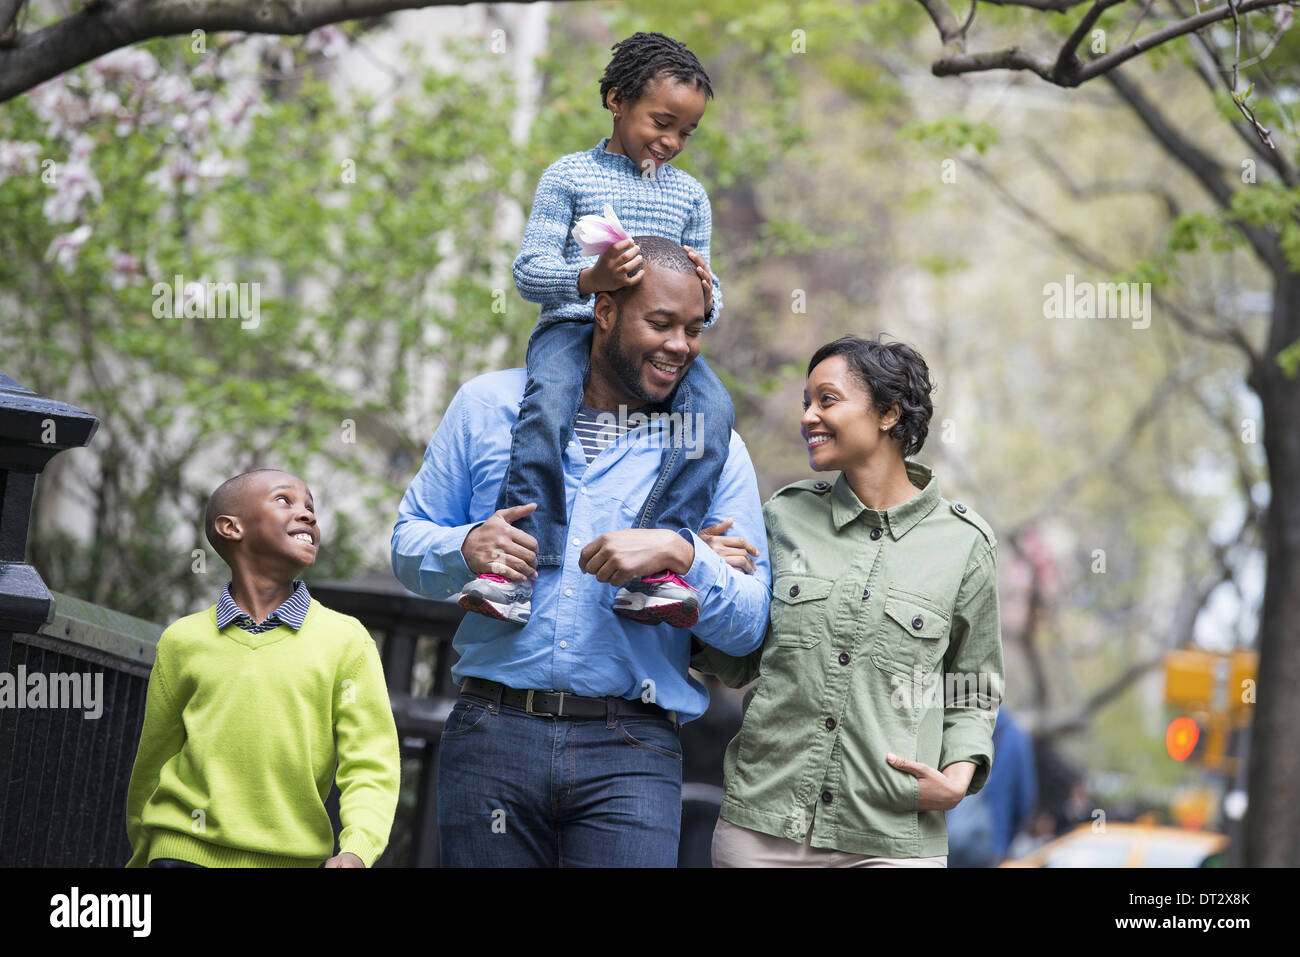 A family parents and two boys A child riding on his father's shoulders Stock Photo